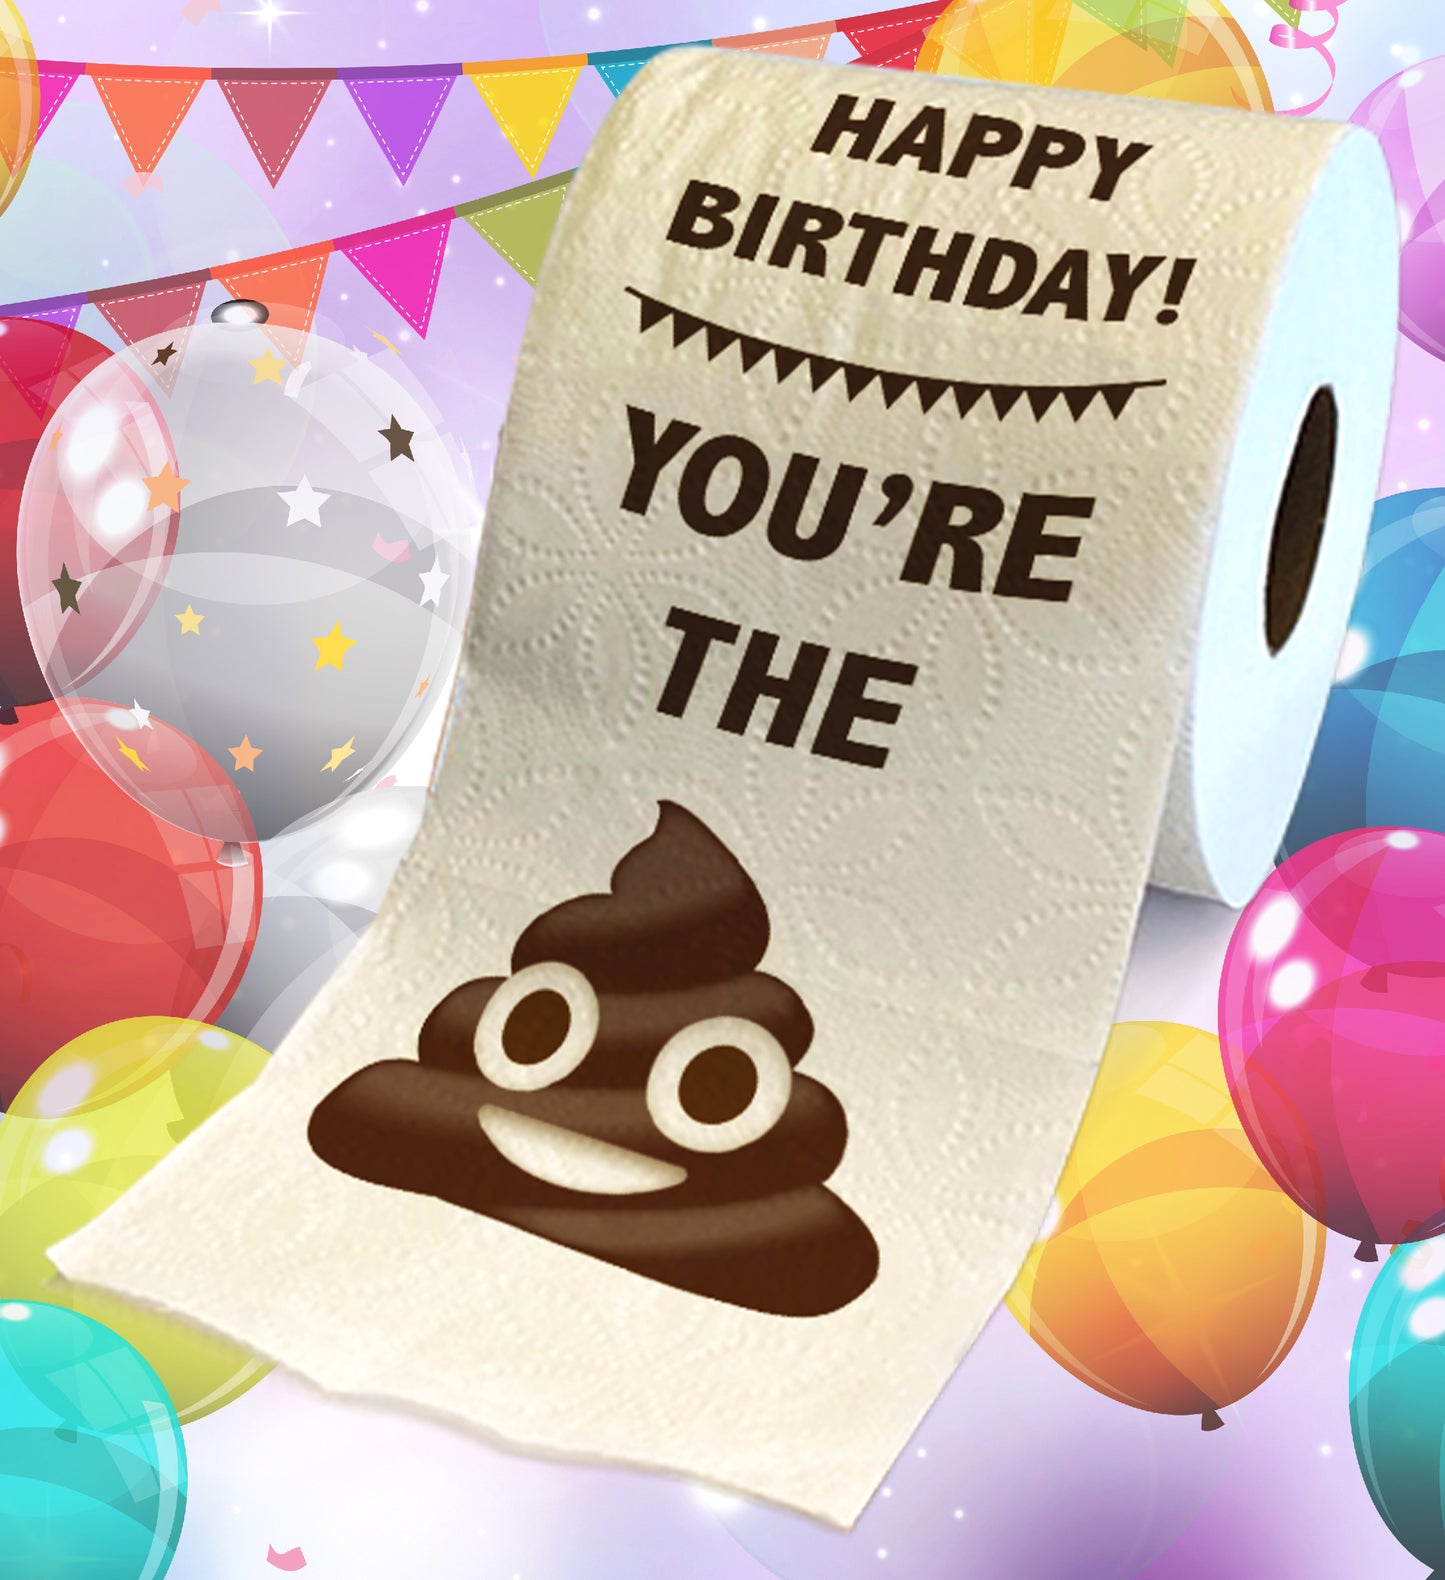 Printed TP Happy Birthday You're the Poop Printed Toilet Paper Gift – 500 Sheet